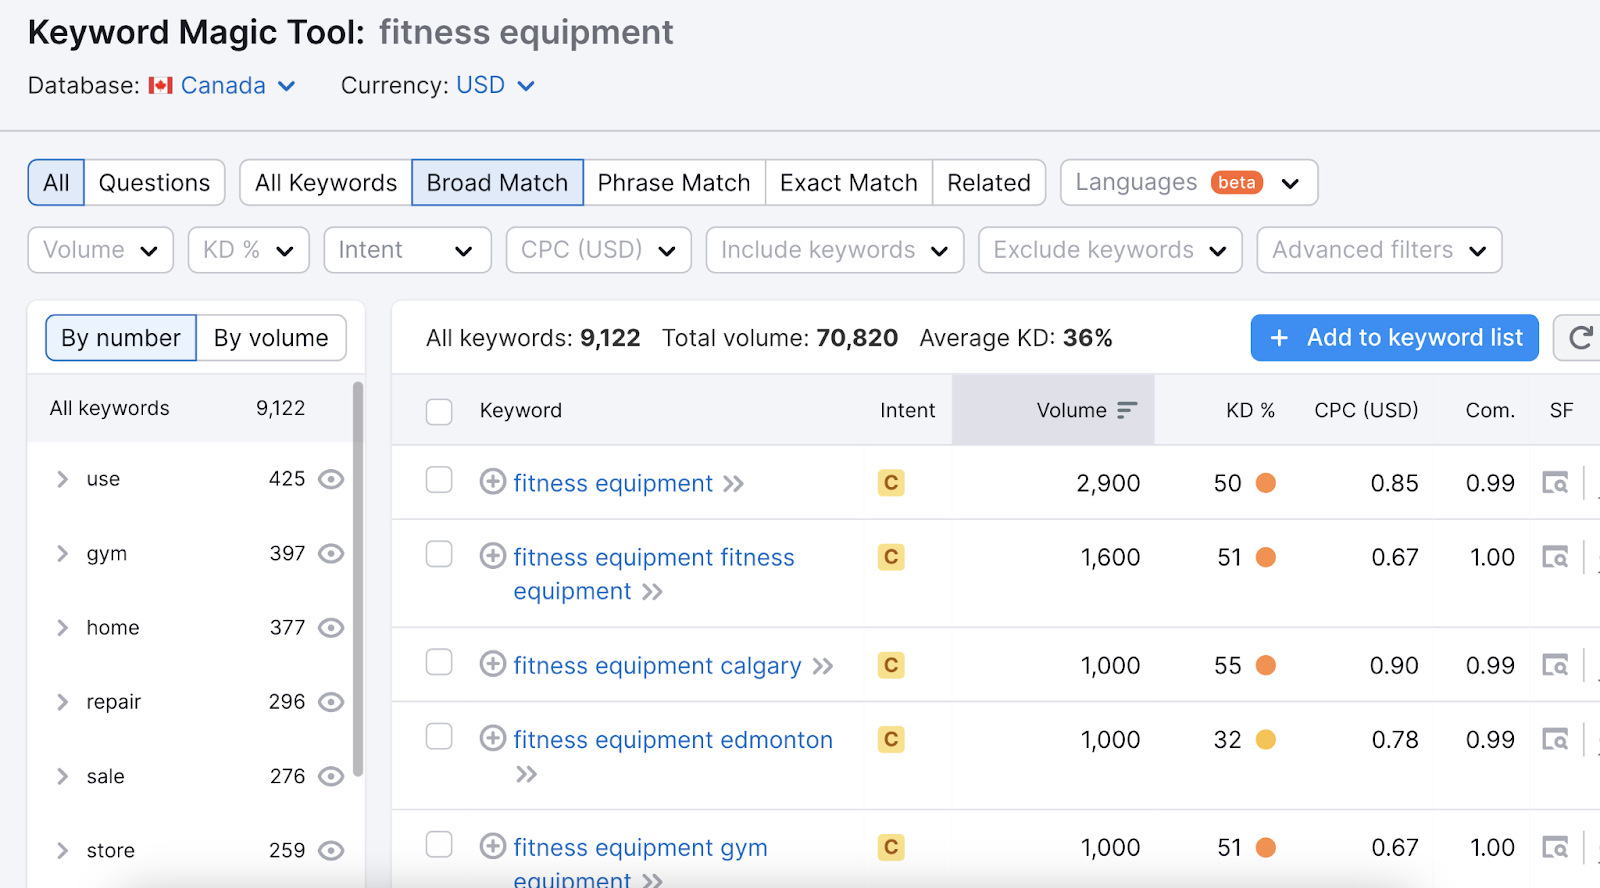 Keyword Magic Tool results for "fitness equipment"